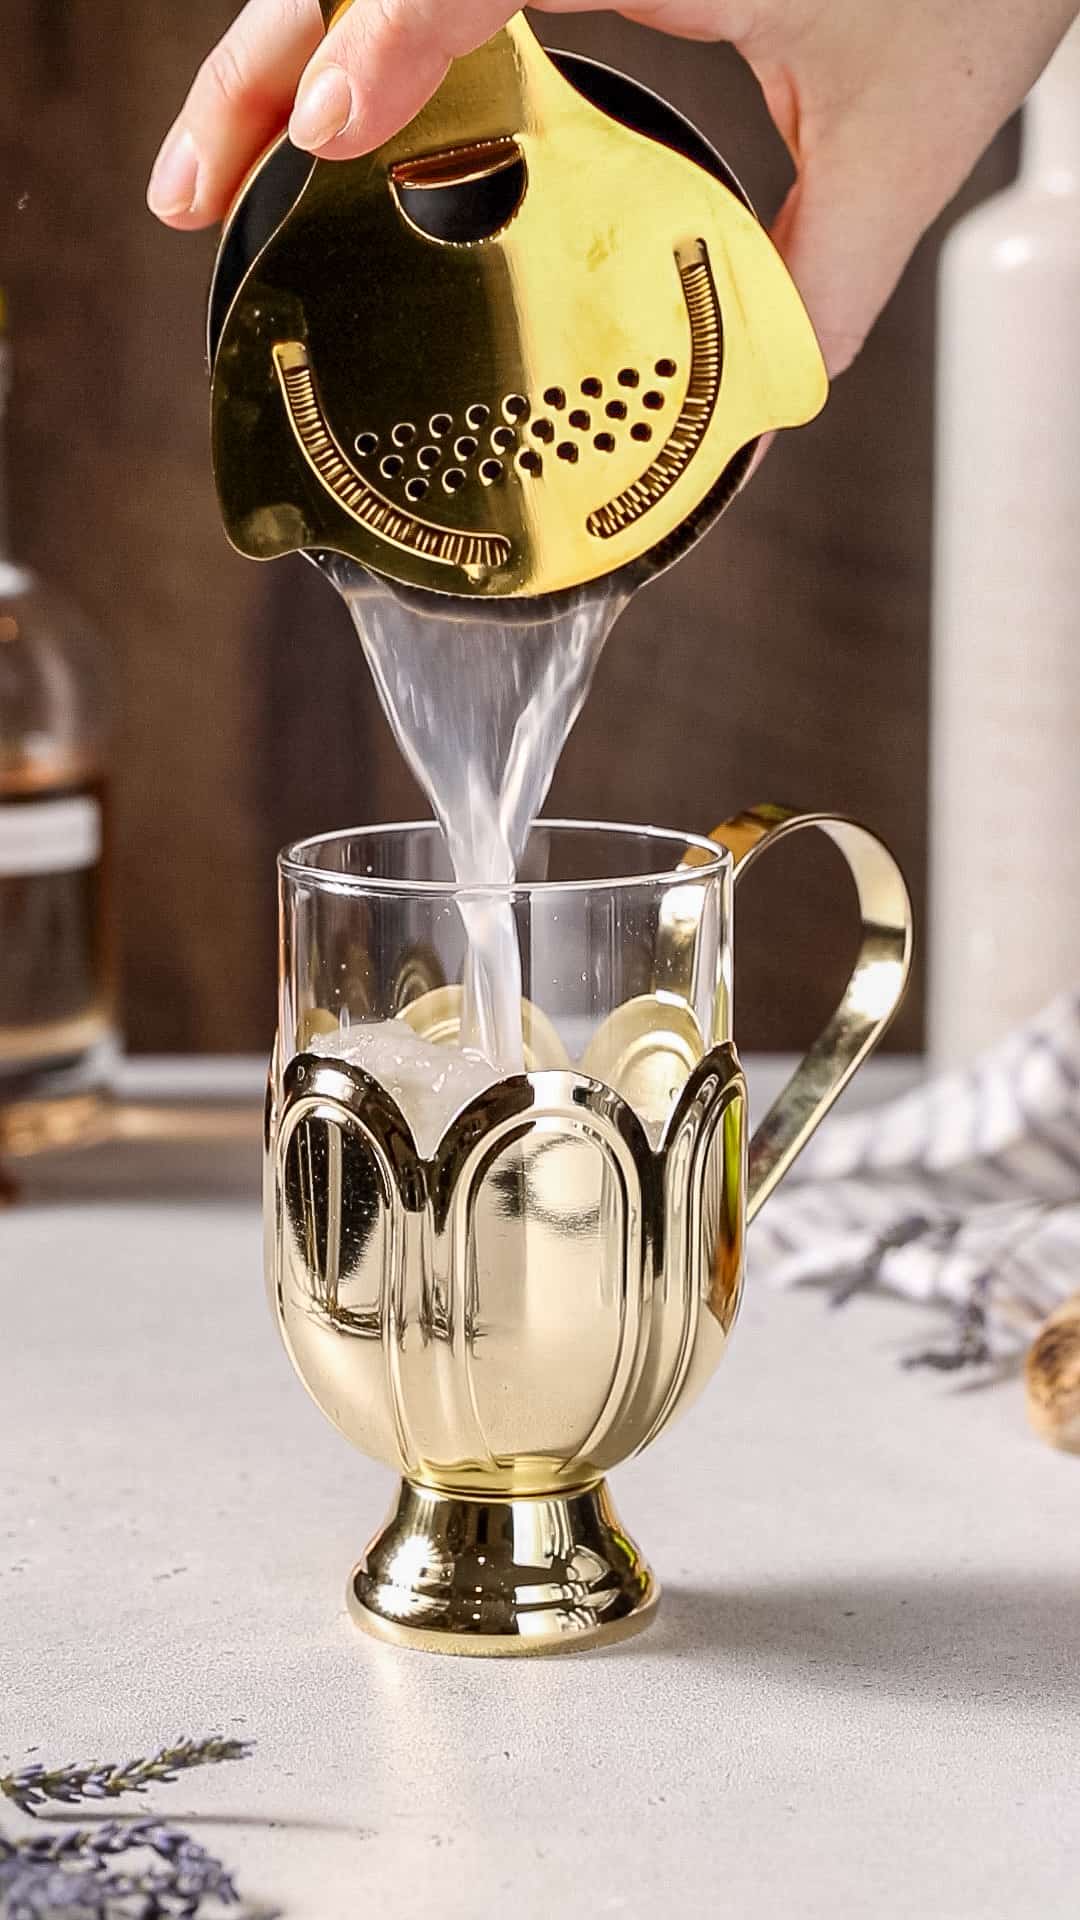 Hand pouring liquid into a gold and glass cocktail serving mug using a shaker and strainer.